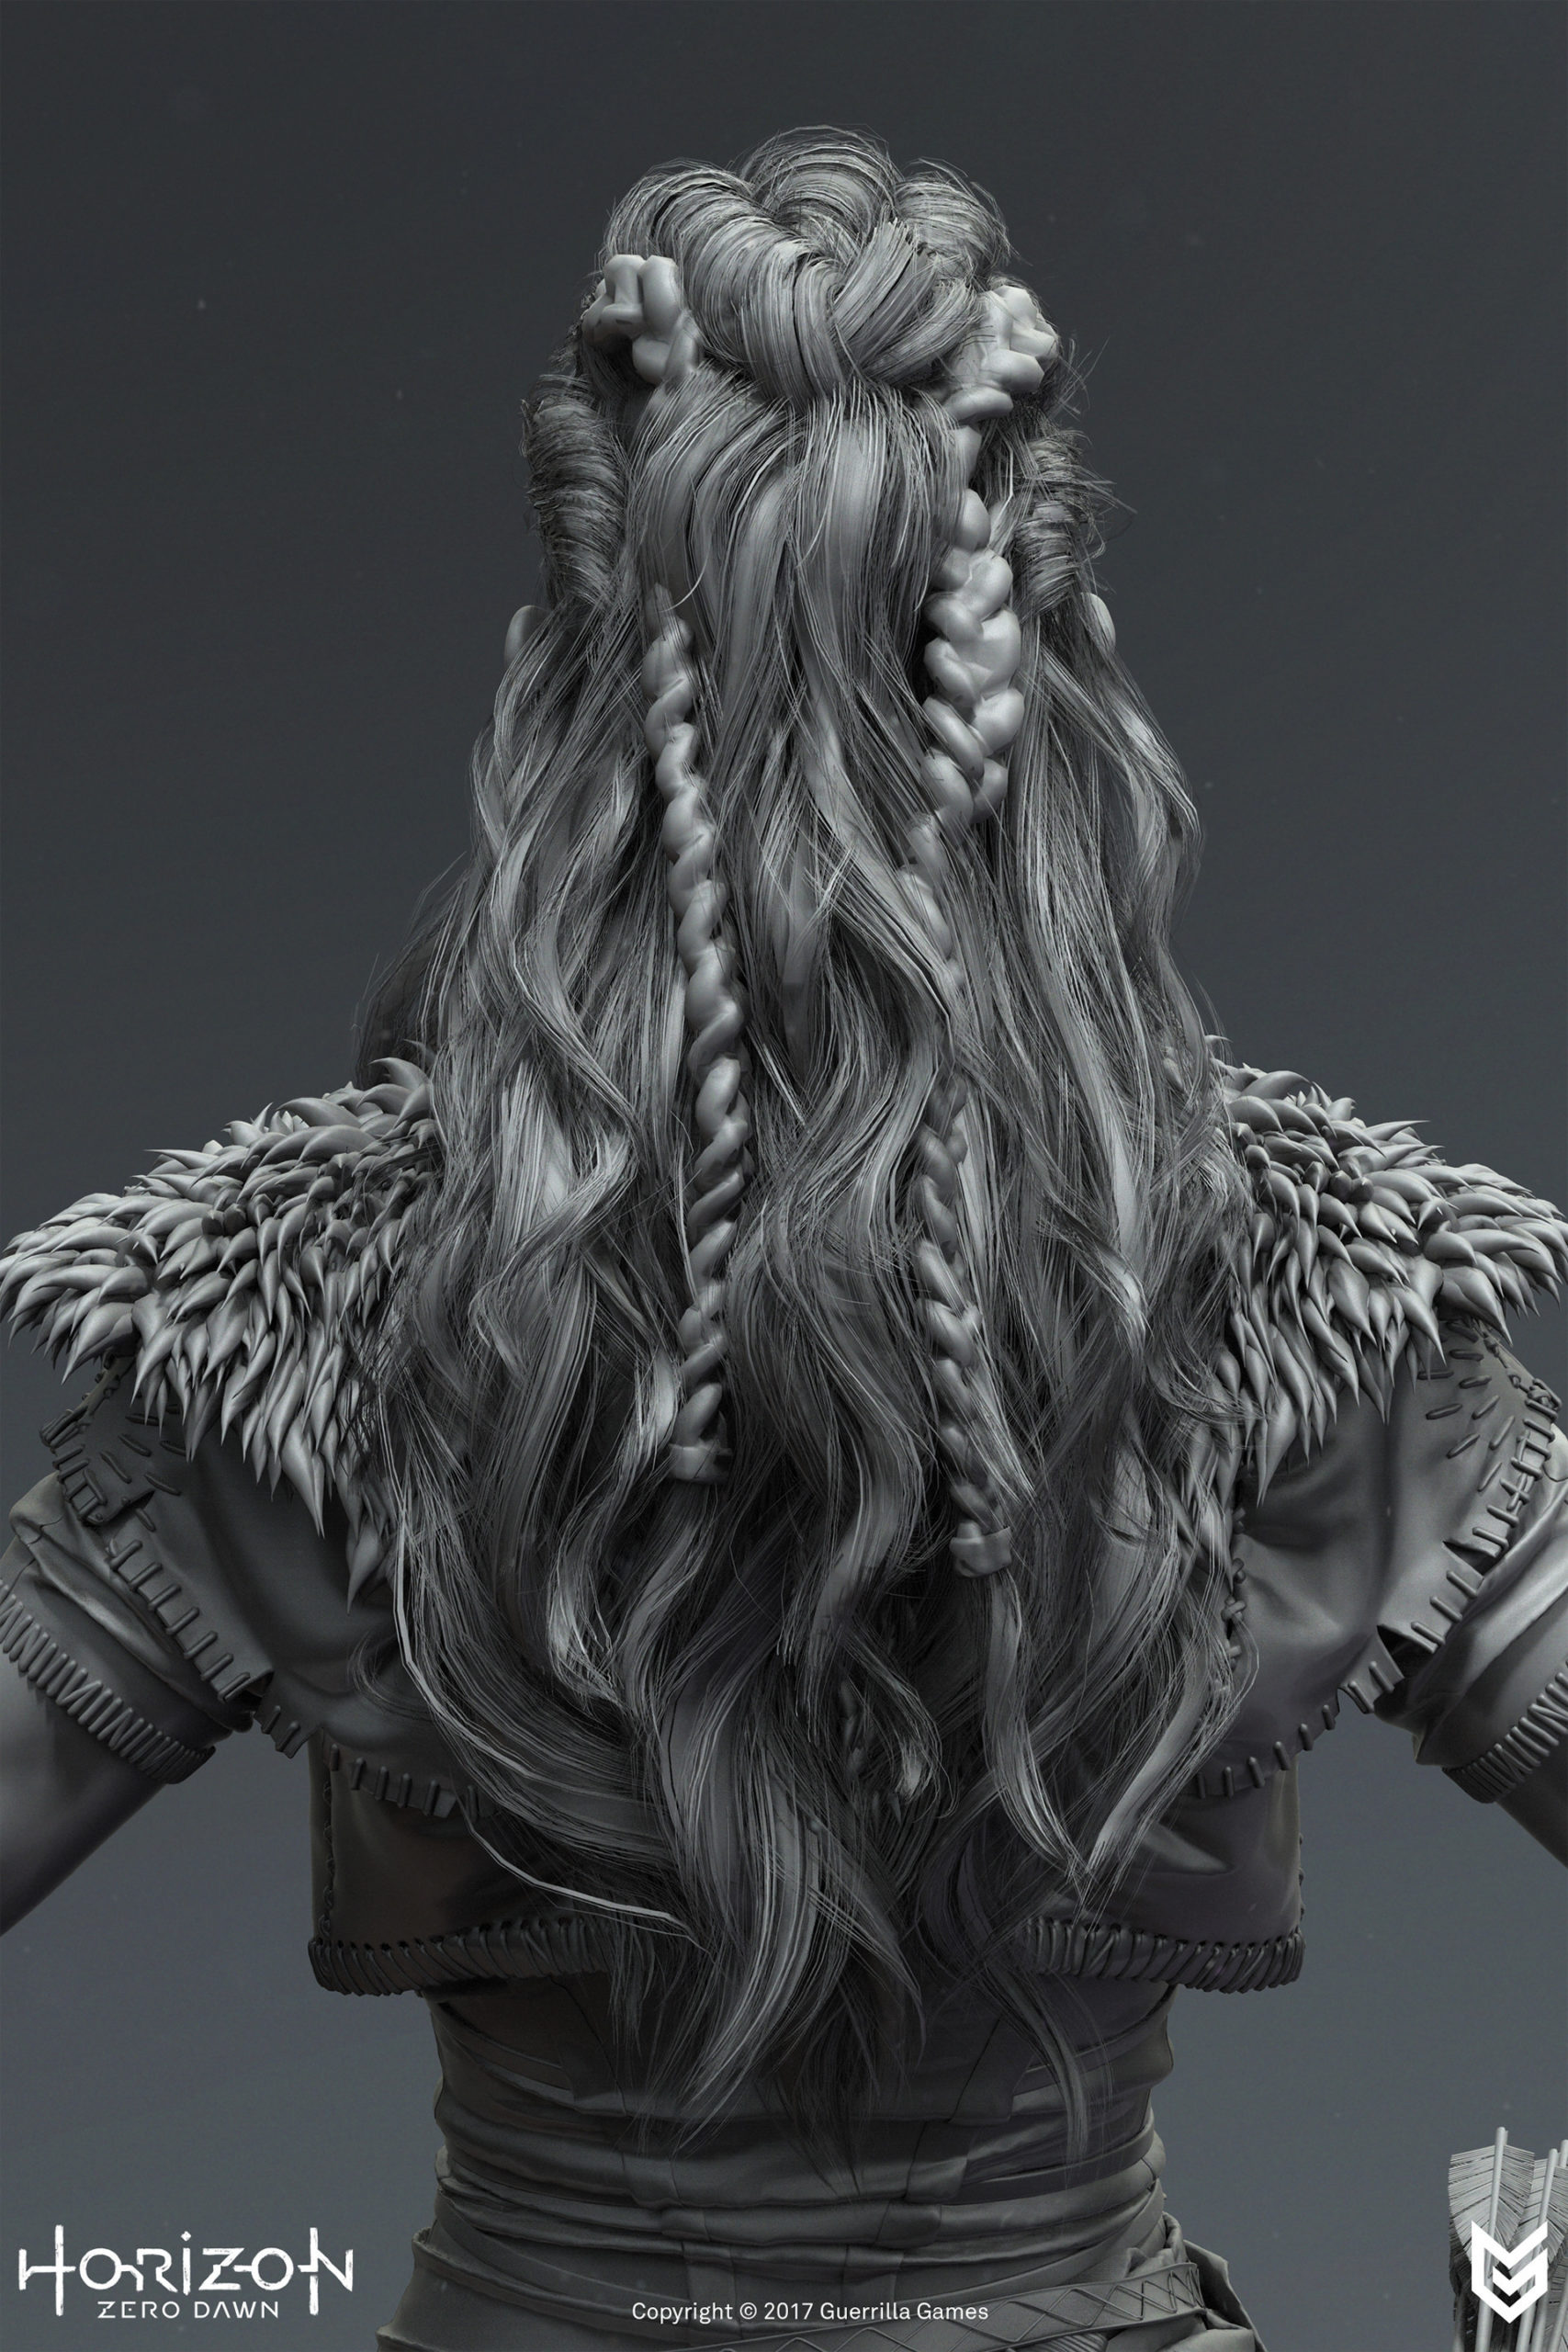 Let’s Appreciate This Fine Video Game Hair